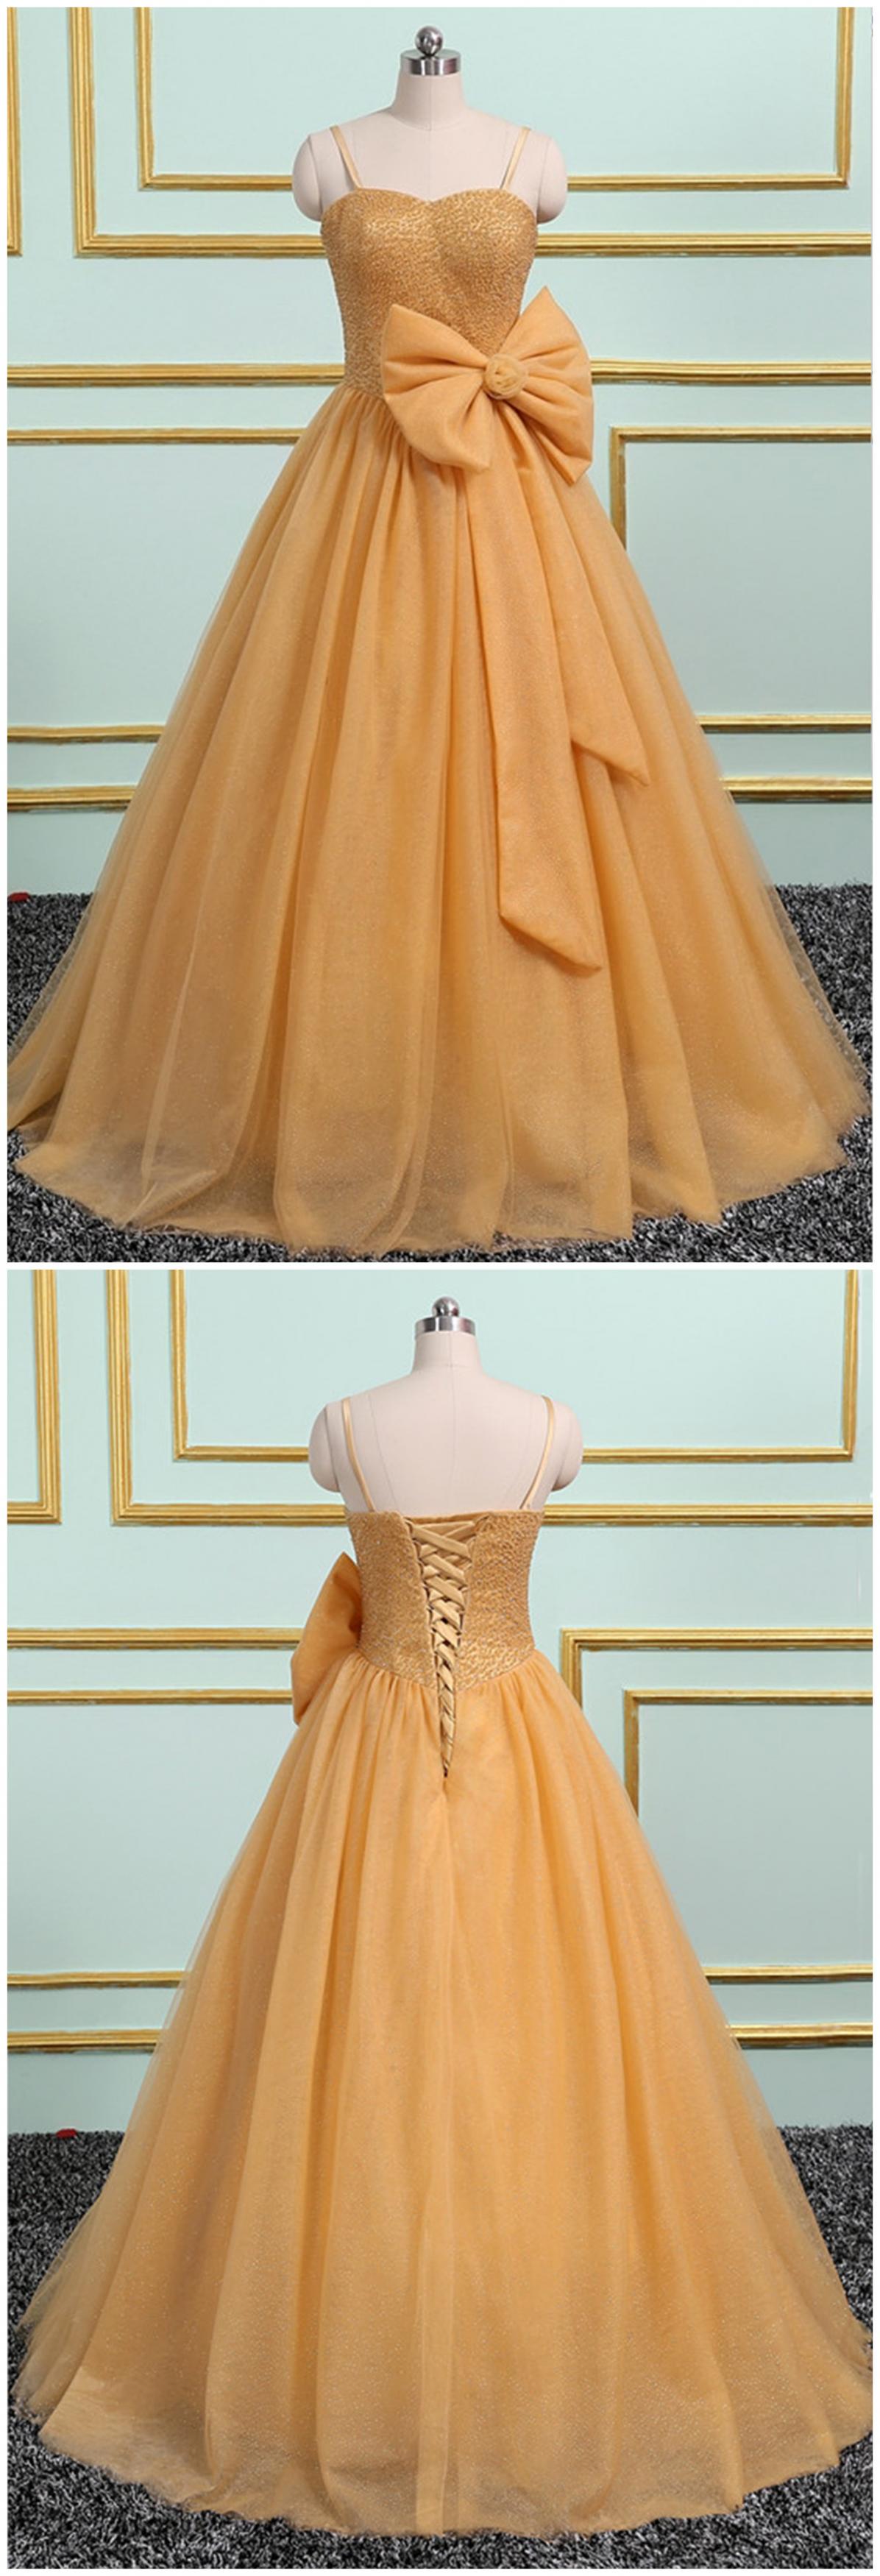 Gold Tulle Long Crystal Evening Dress, Sweet 16 Dress With Bow